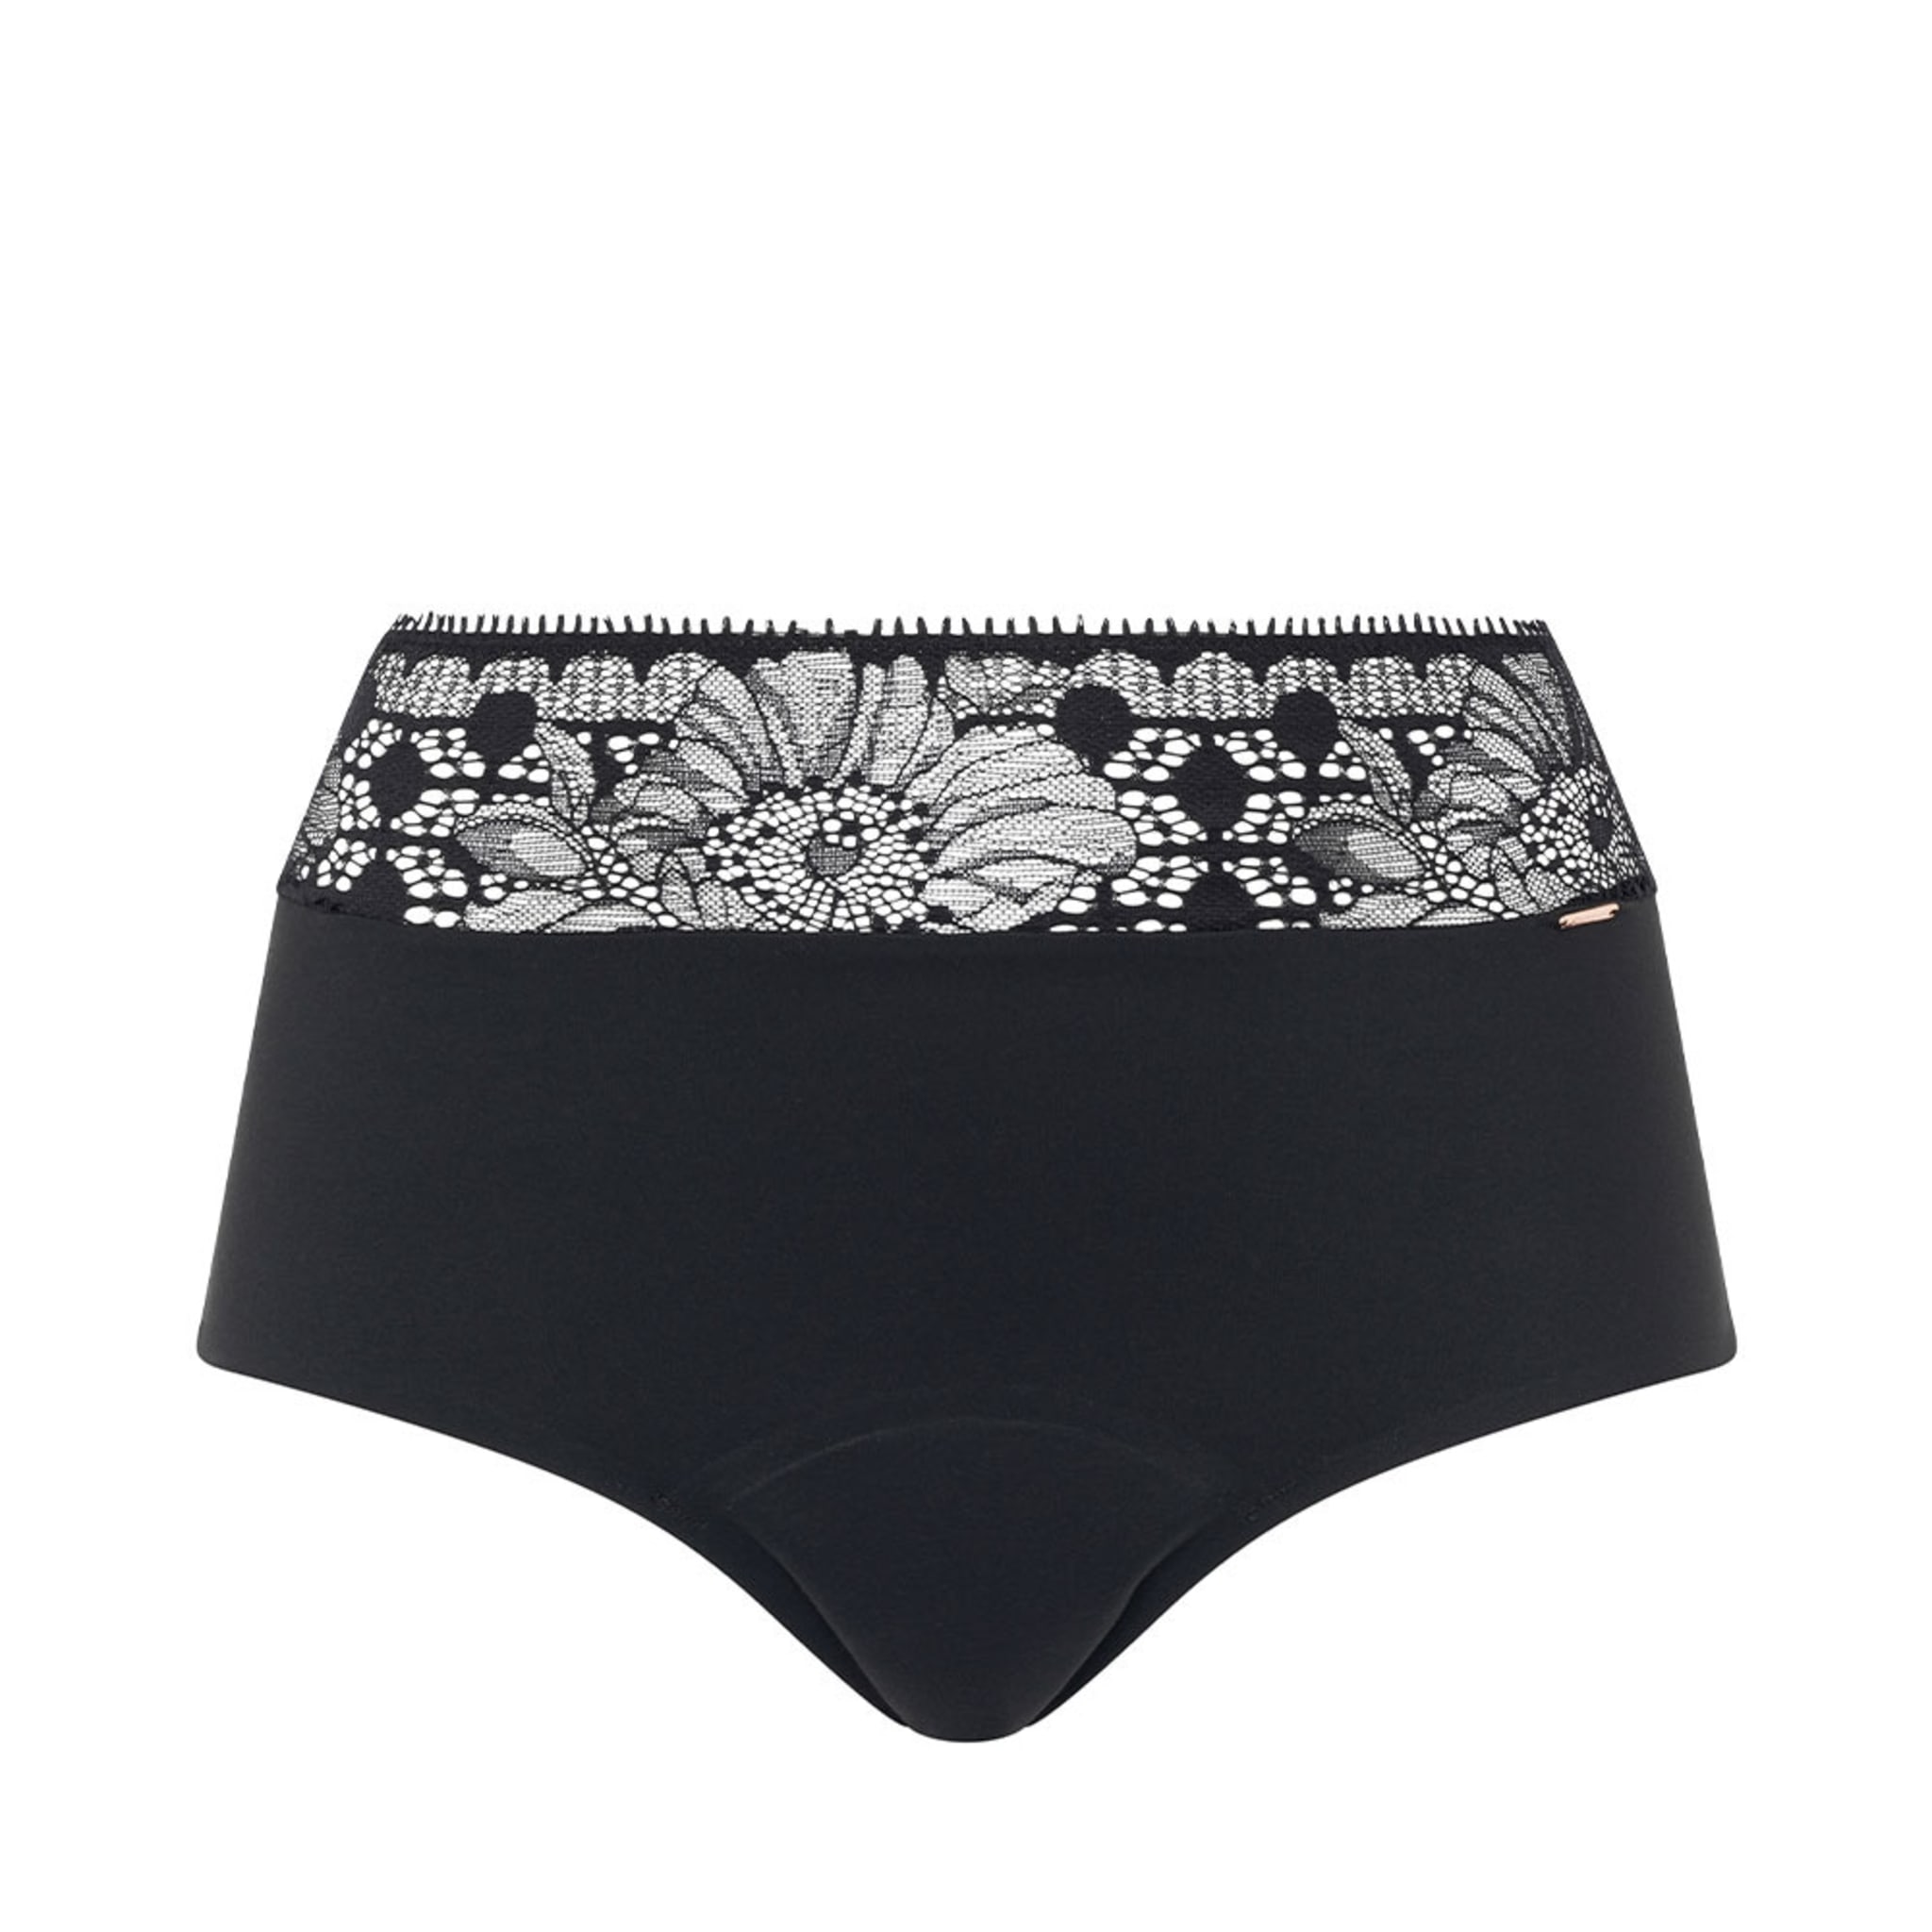 Day to Night Period Panty Lace High Waist Brief , Black